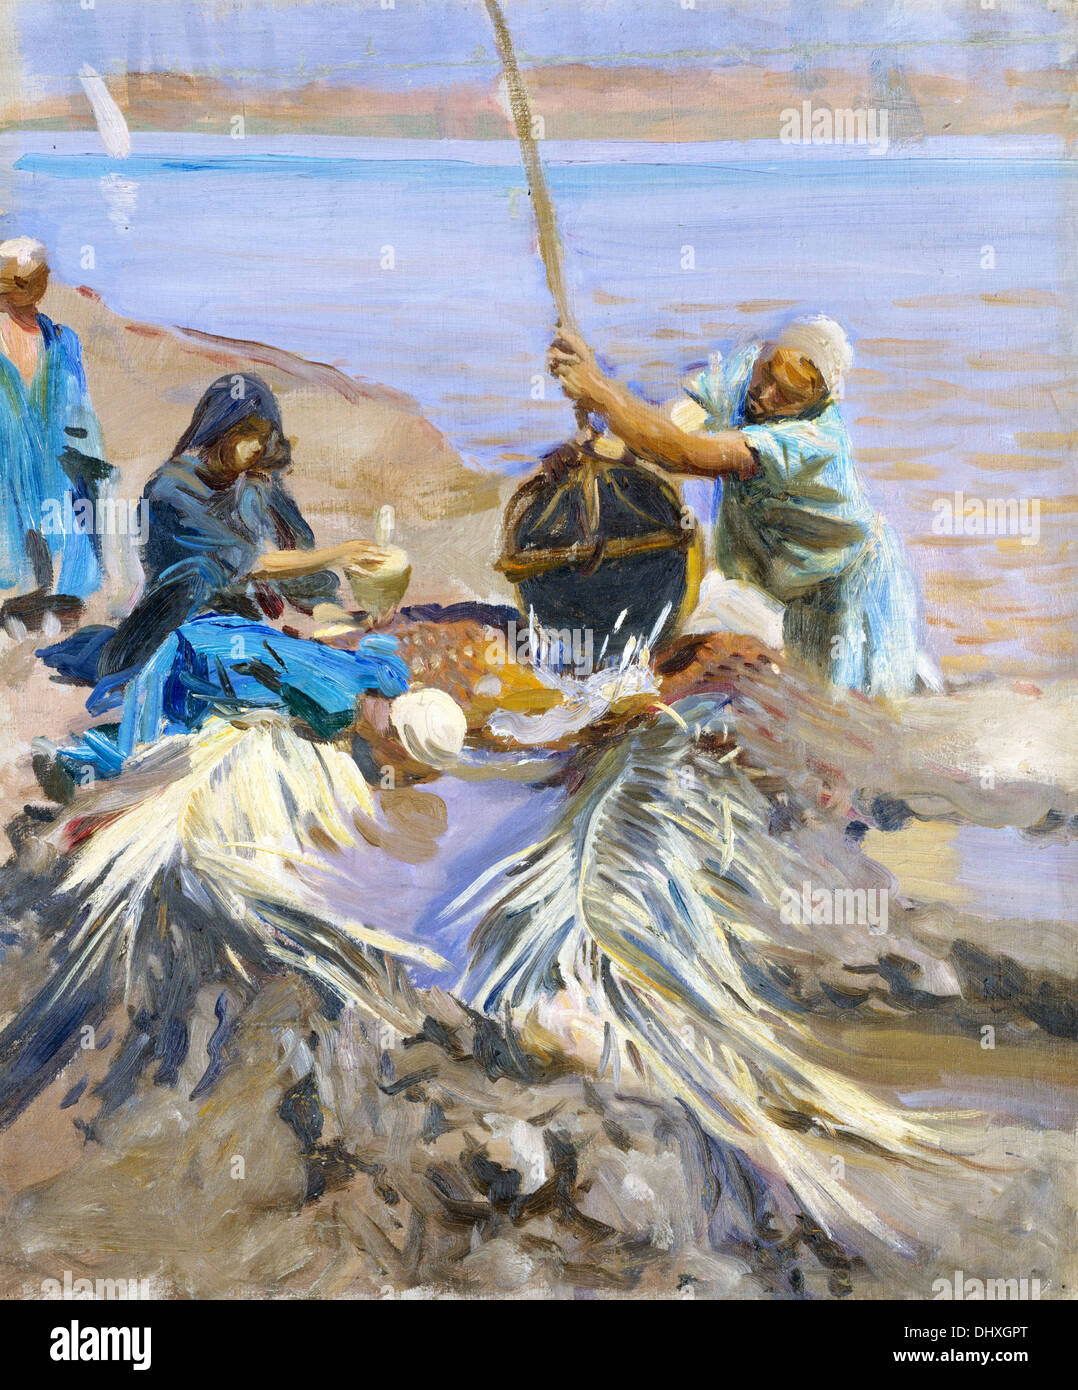 Egyptians Raising Water from the Nile - by John Singer Sargent, 1891 Stock Photo